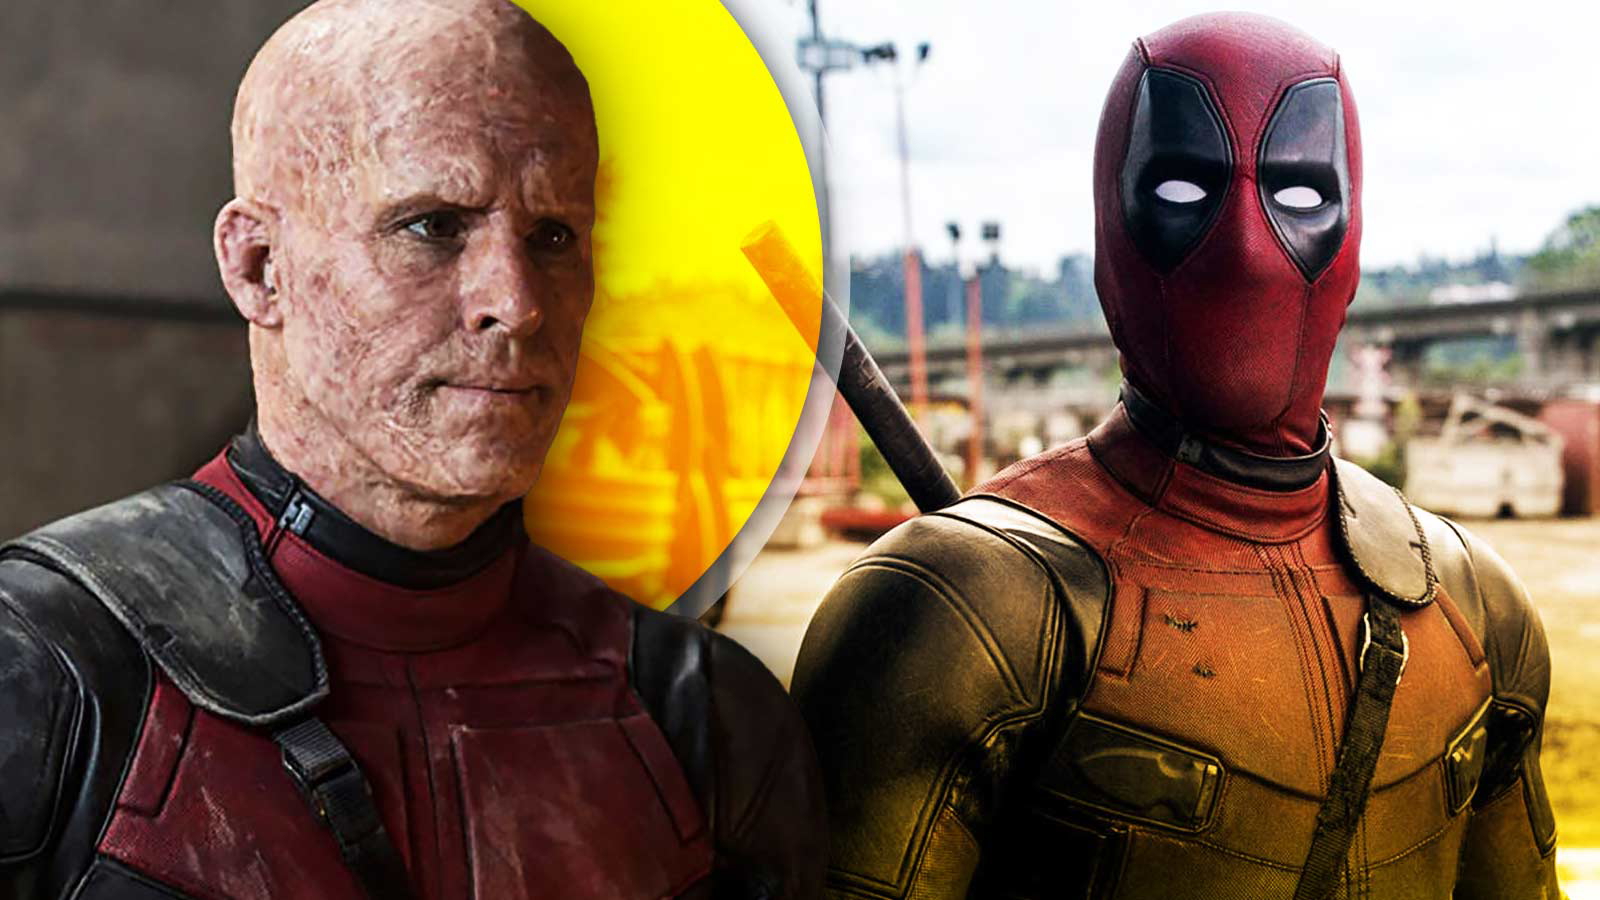 “I was Scottie Pippen”: Ryan Reynolds Finally Confirms What Fans Had Long Suspected About Deadpool 1